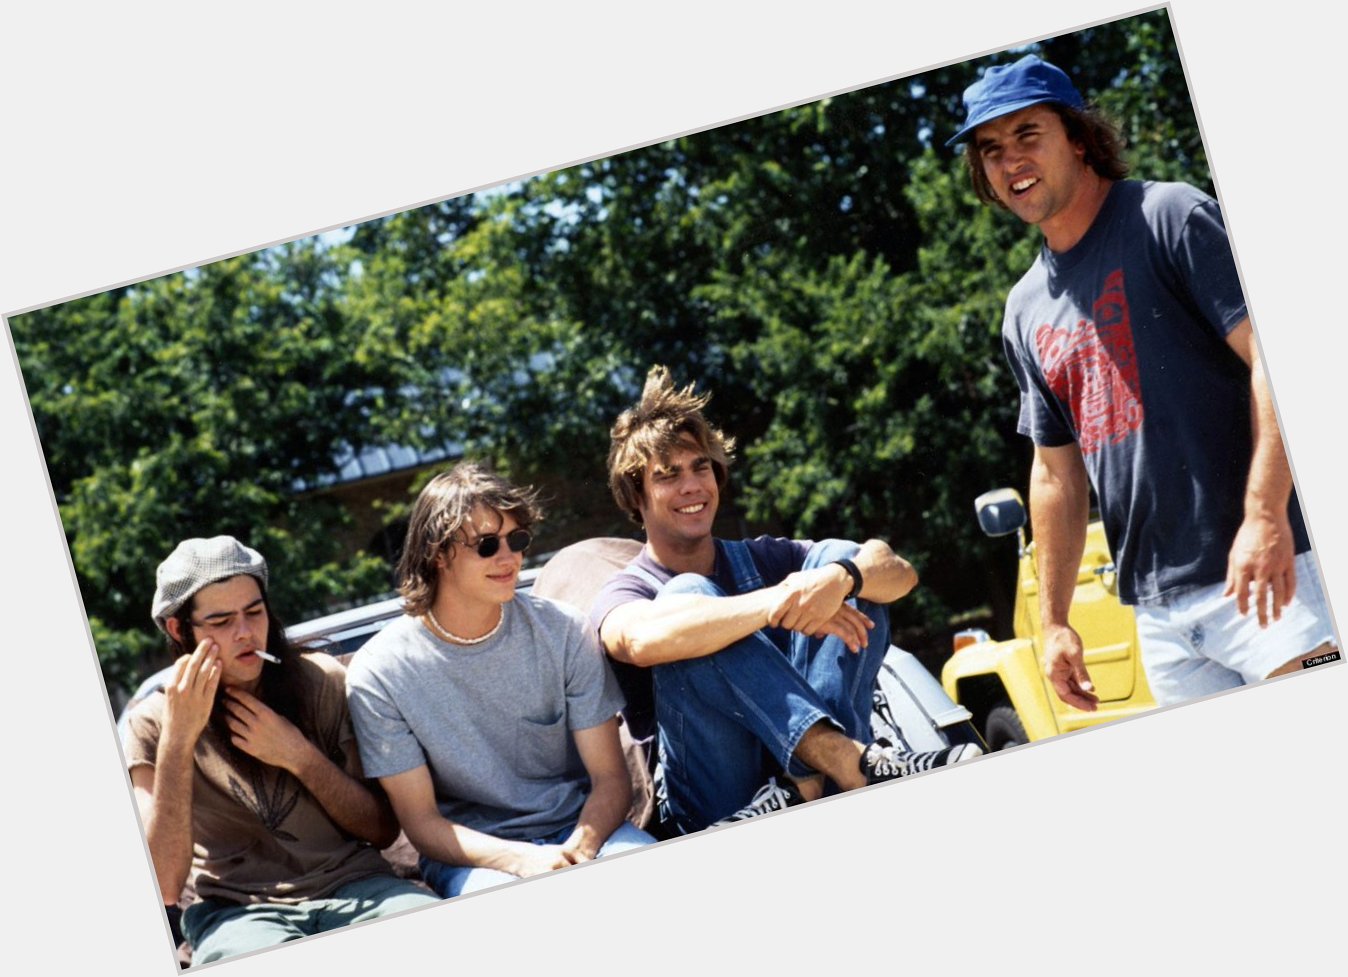 Happy Birthday to filmmaker Richard Linklater. Here on the set of his film DAZED AND CONFUSED (1993). 